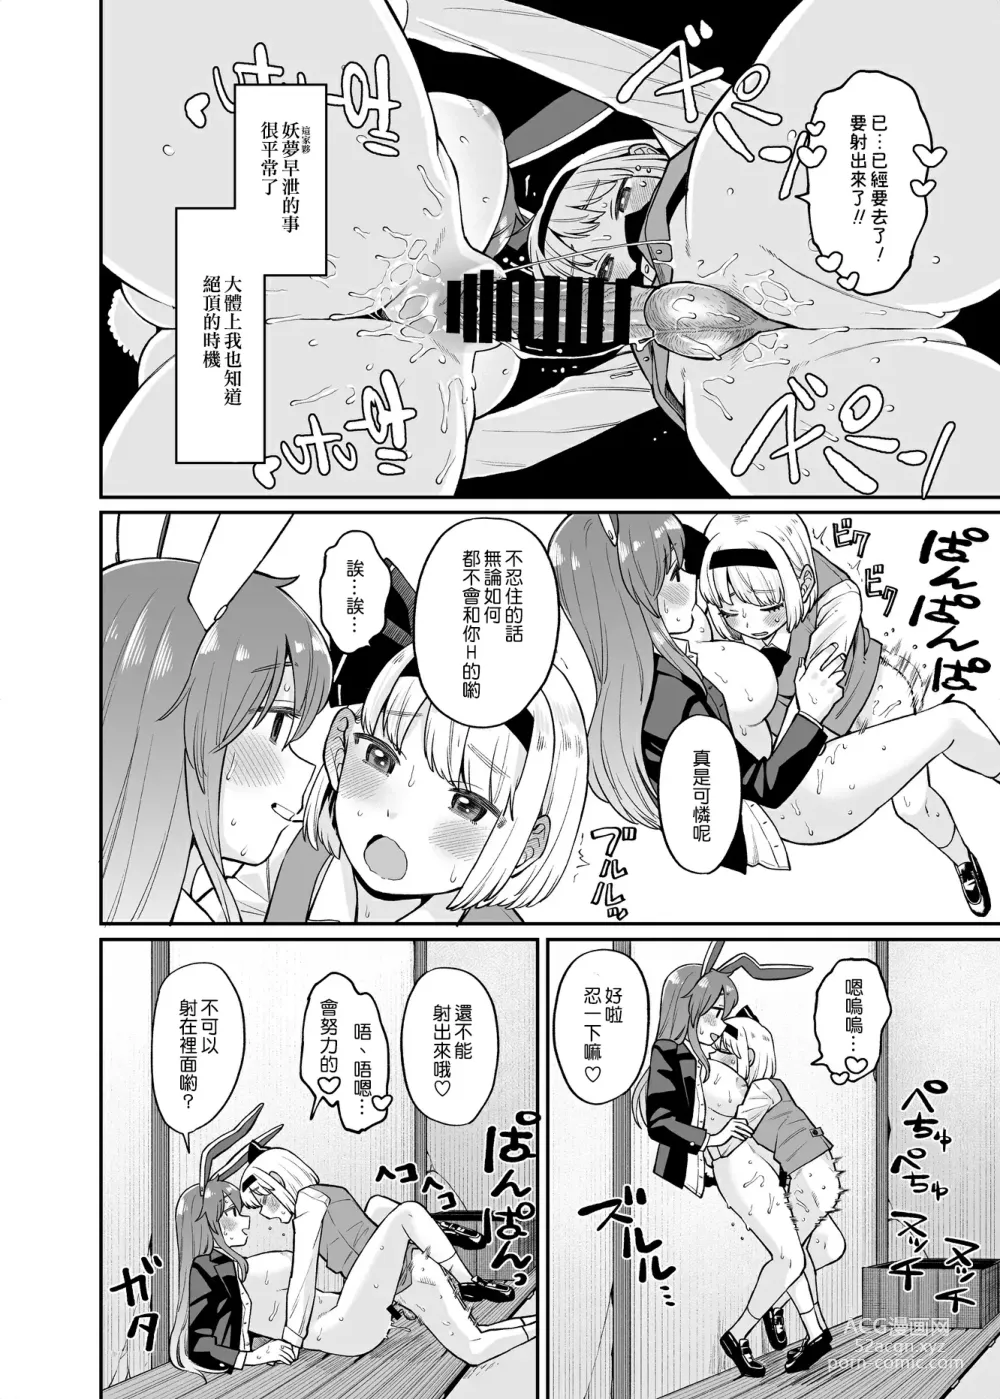 Page 12 of doujinshi 乌冬铃仙系列第3话